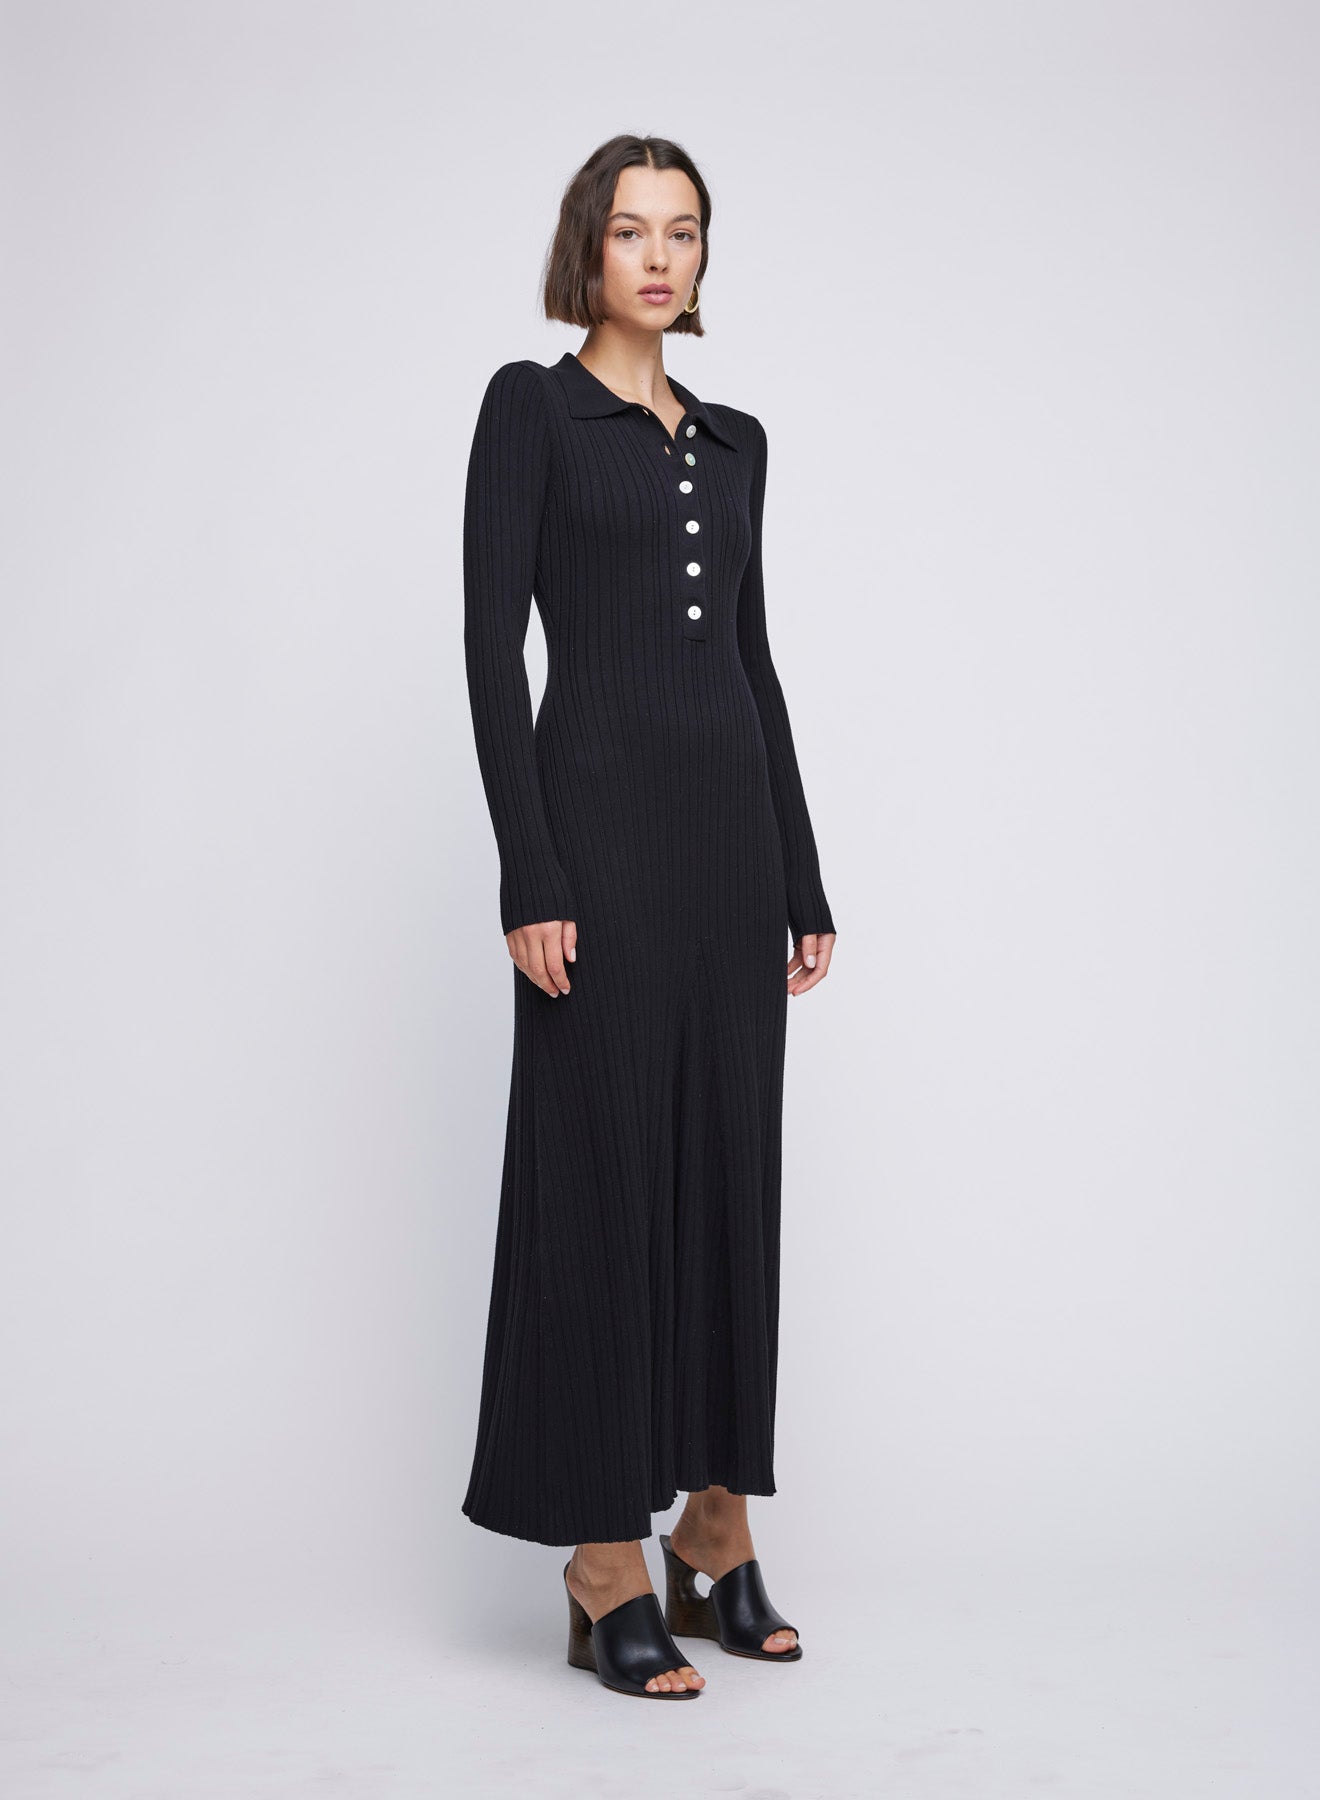 Long sleeve cotton rib collared maxi dress with contrast buttons. Black knit dress, black dress, black long sleeve dress, little black dress, black knit dress, chic black dress, chic black knit dress.